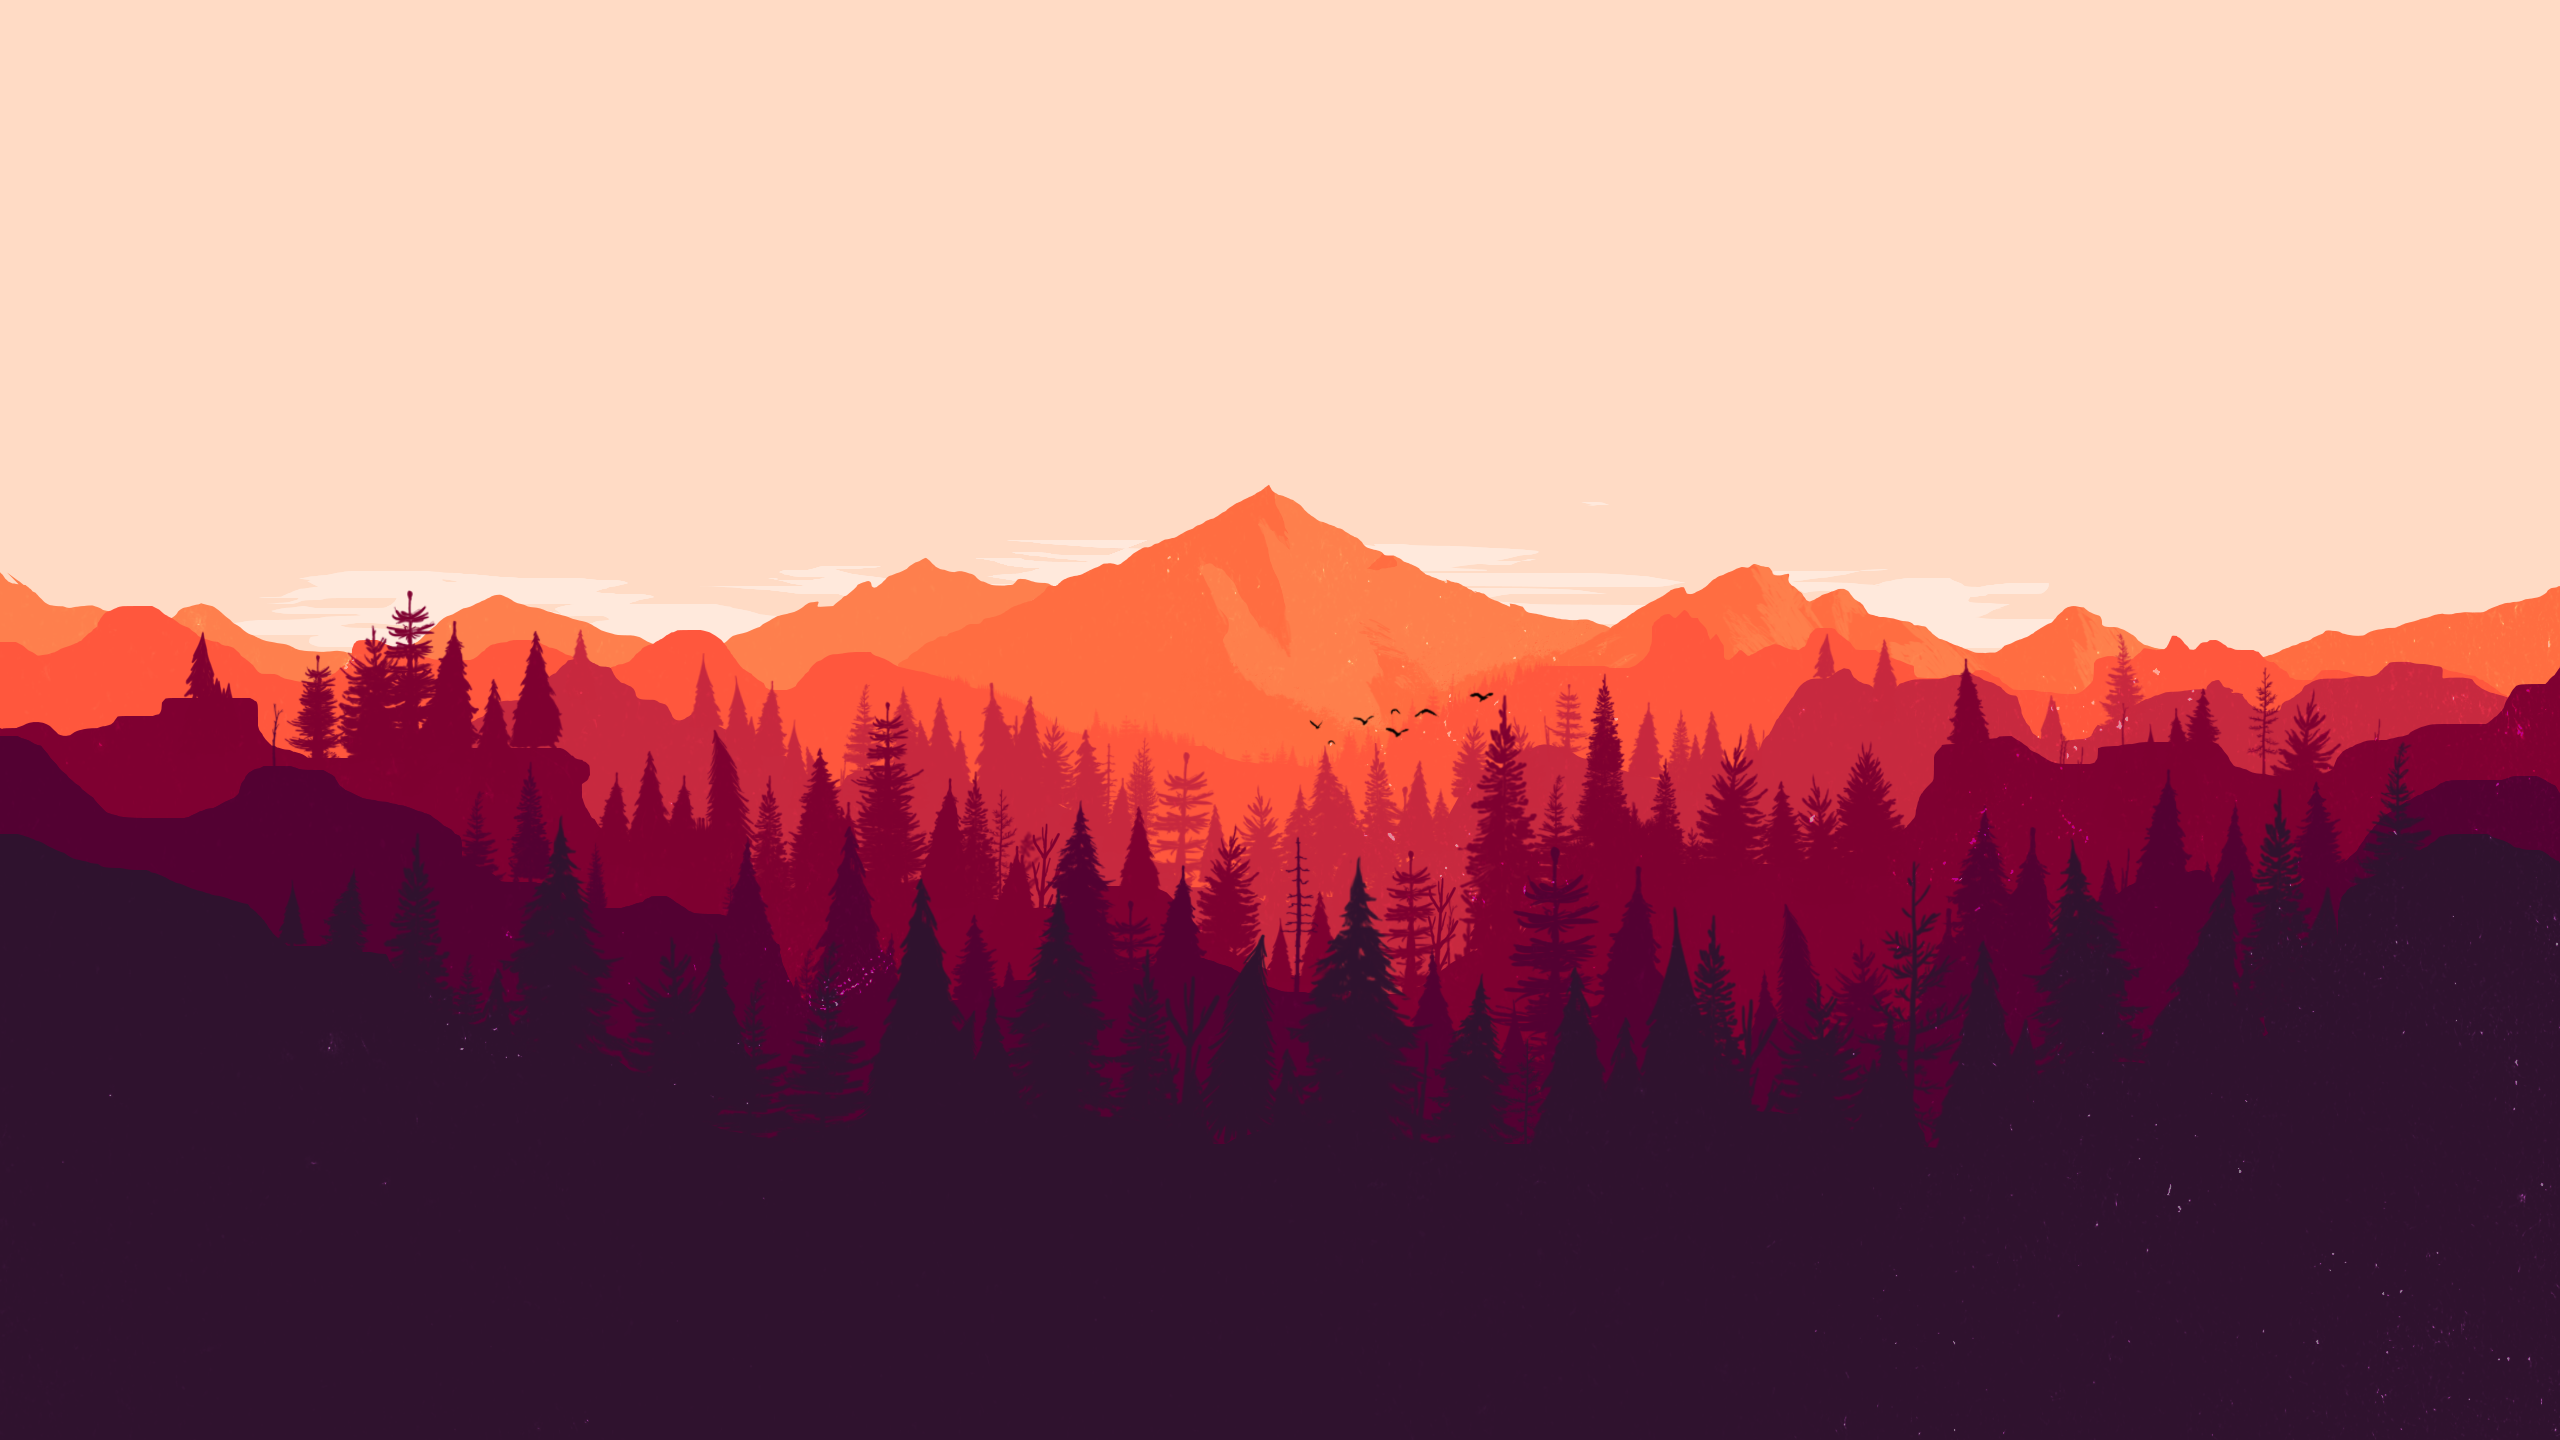 General 2560x1440 forest Firewatch orange red pine trees PC gaming video game art video games video game landscape